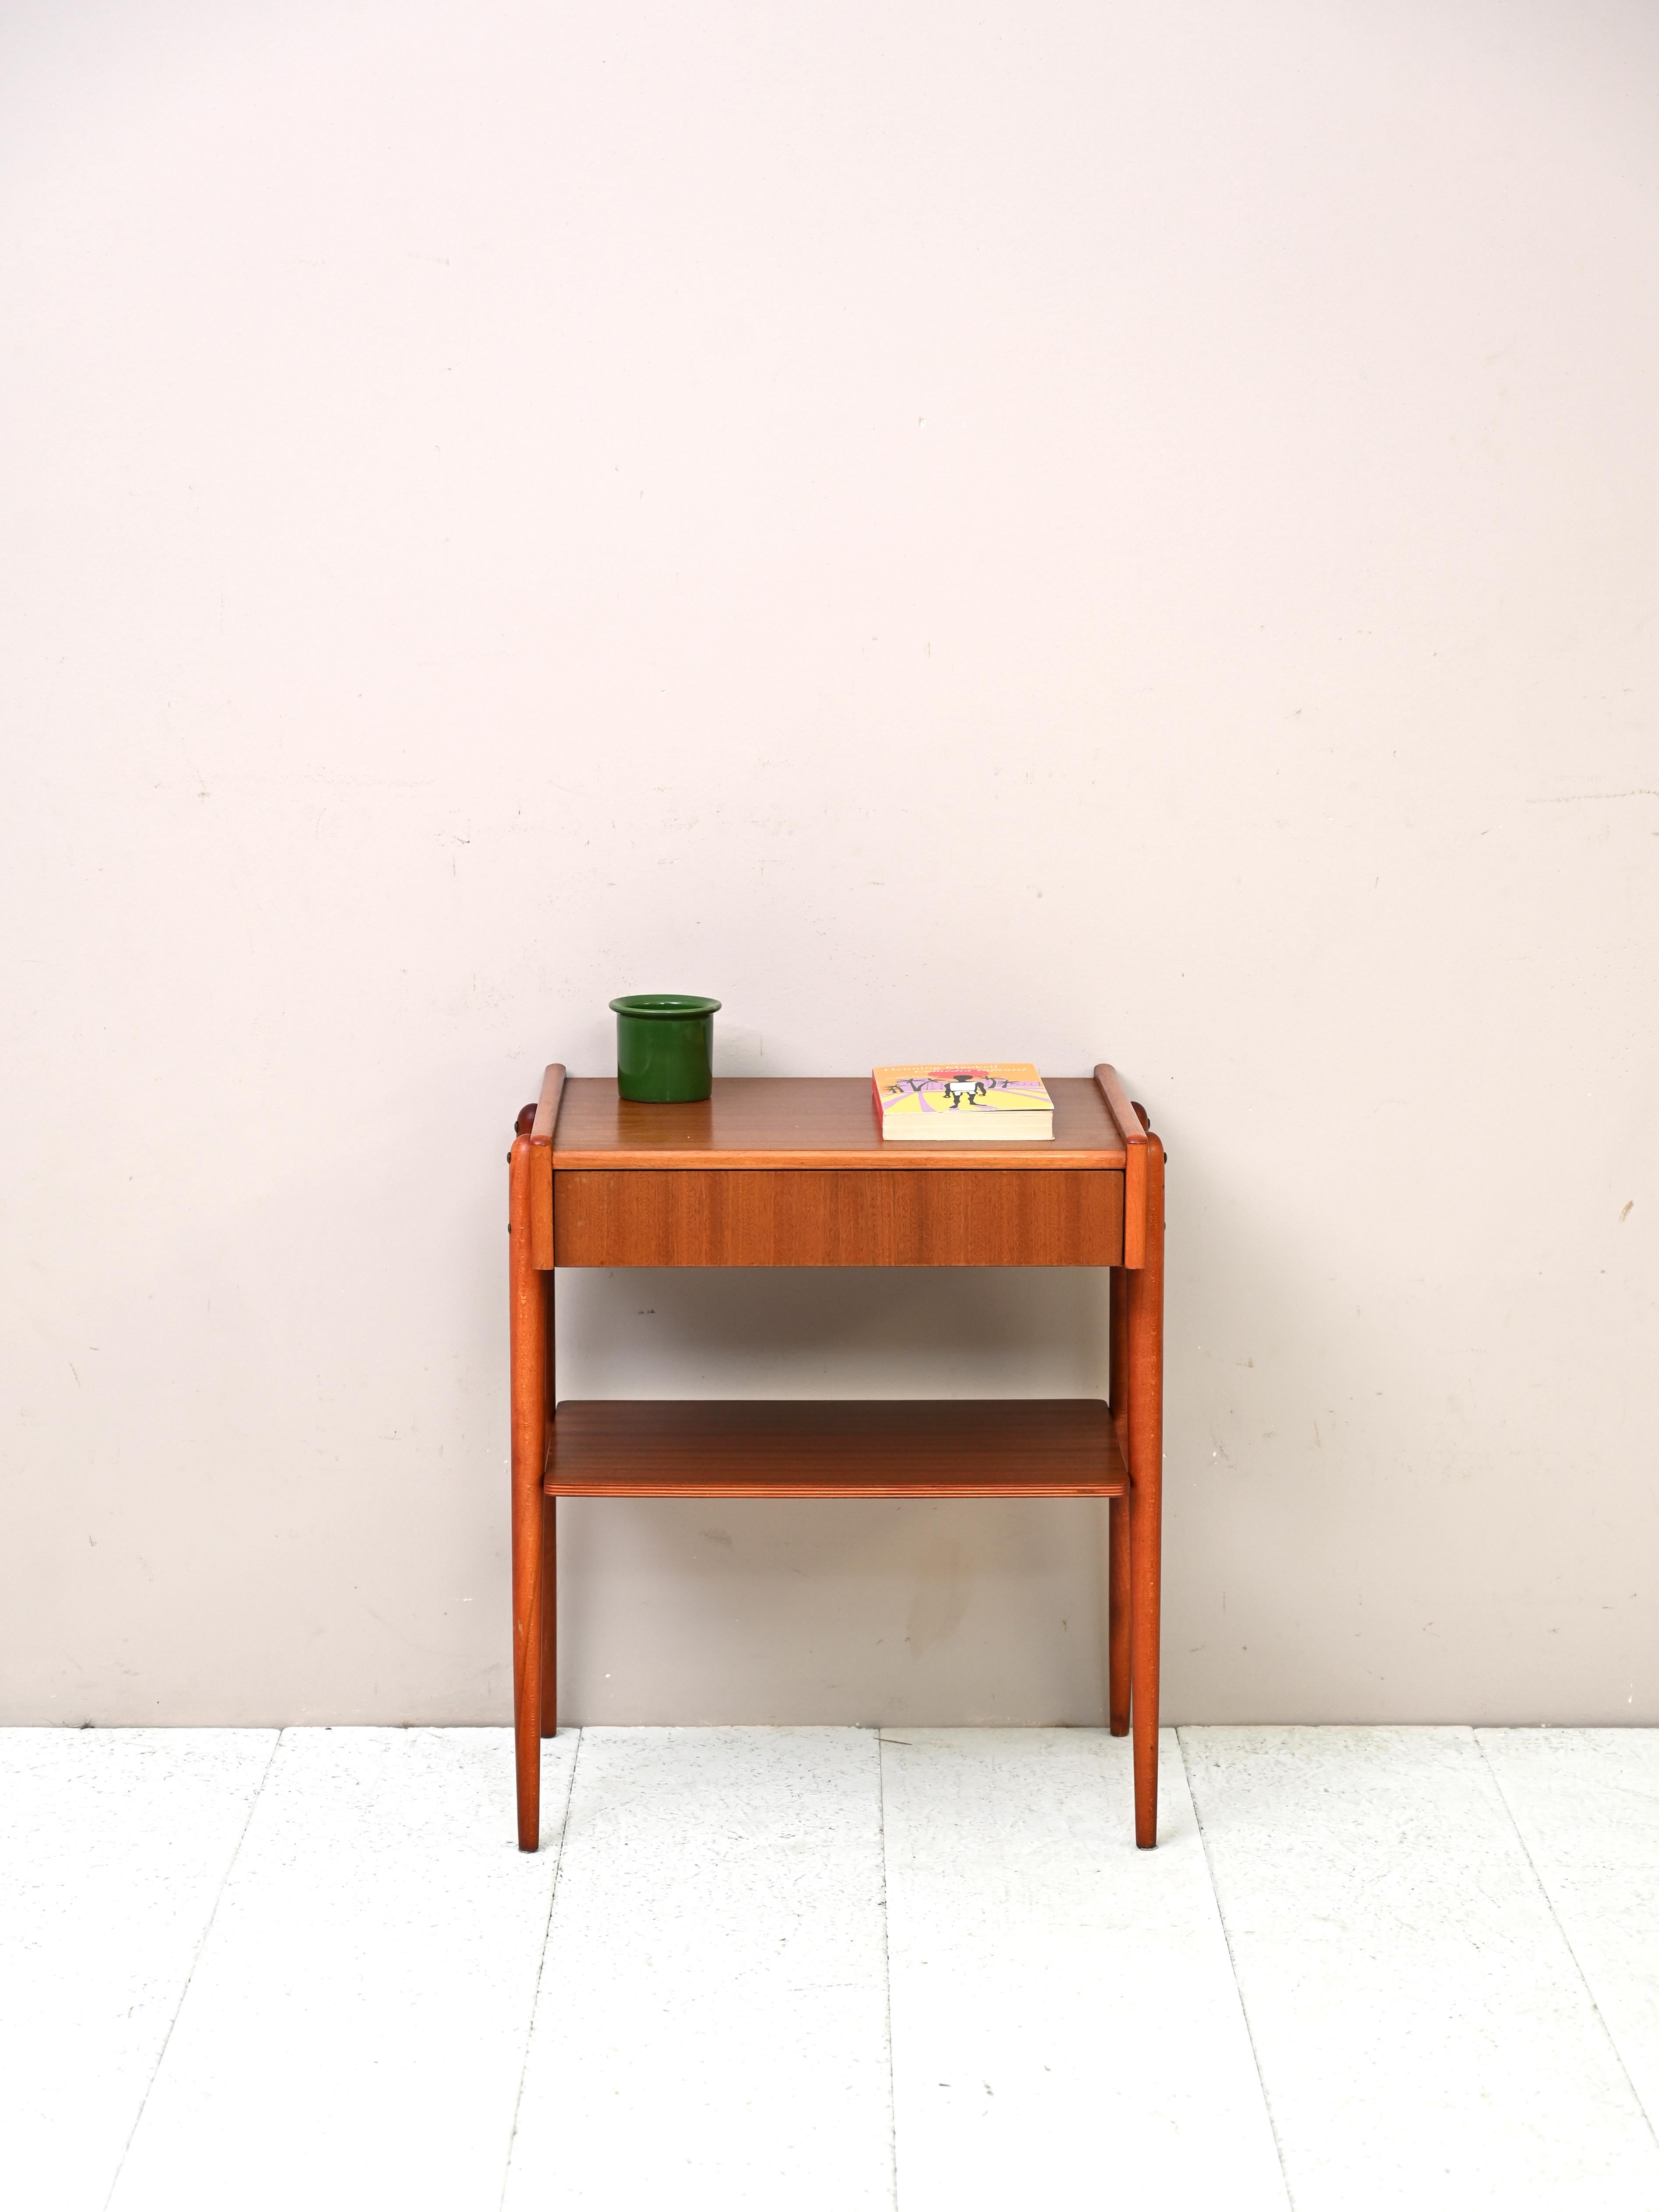 Mahogany bedside table with drawer built into the frame.
A piece of furniture with an original mid-century Nordic design. The teak wood frame is linear and uncluttered but enhanced by the concealed drawer and long tapered legs. There is also a teak